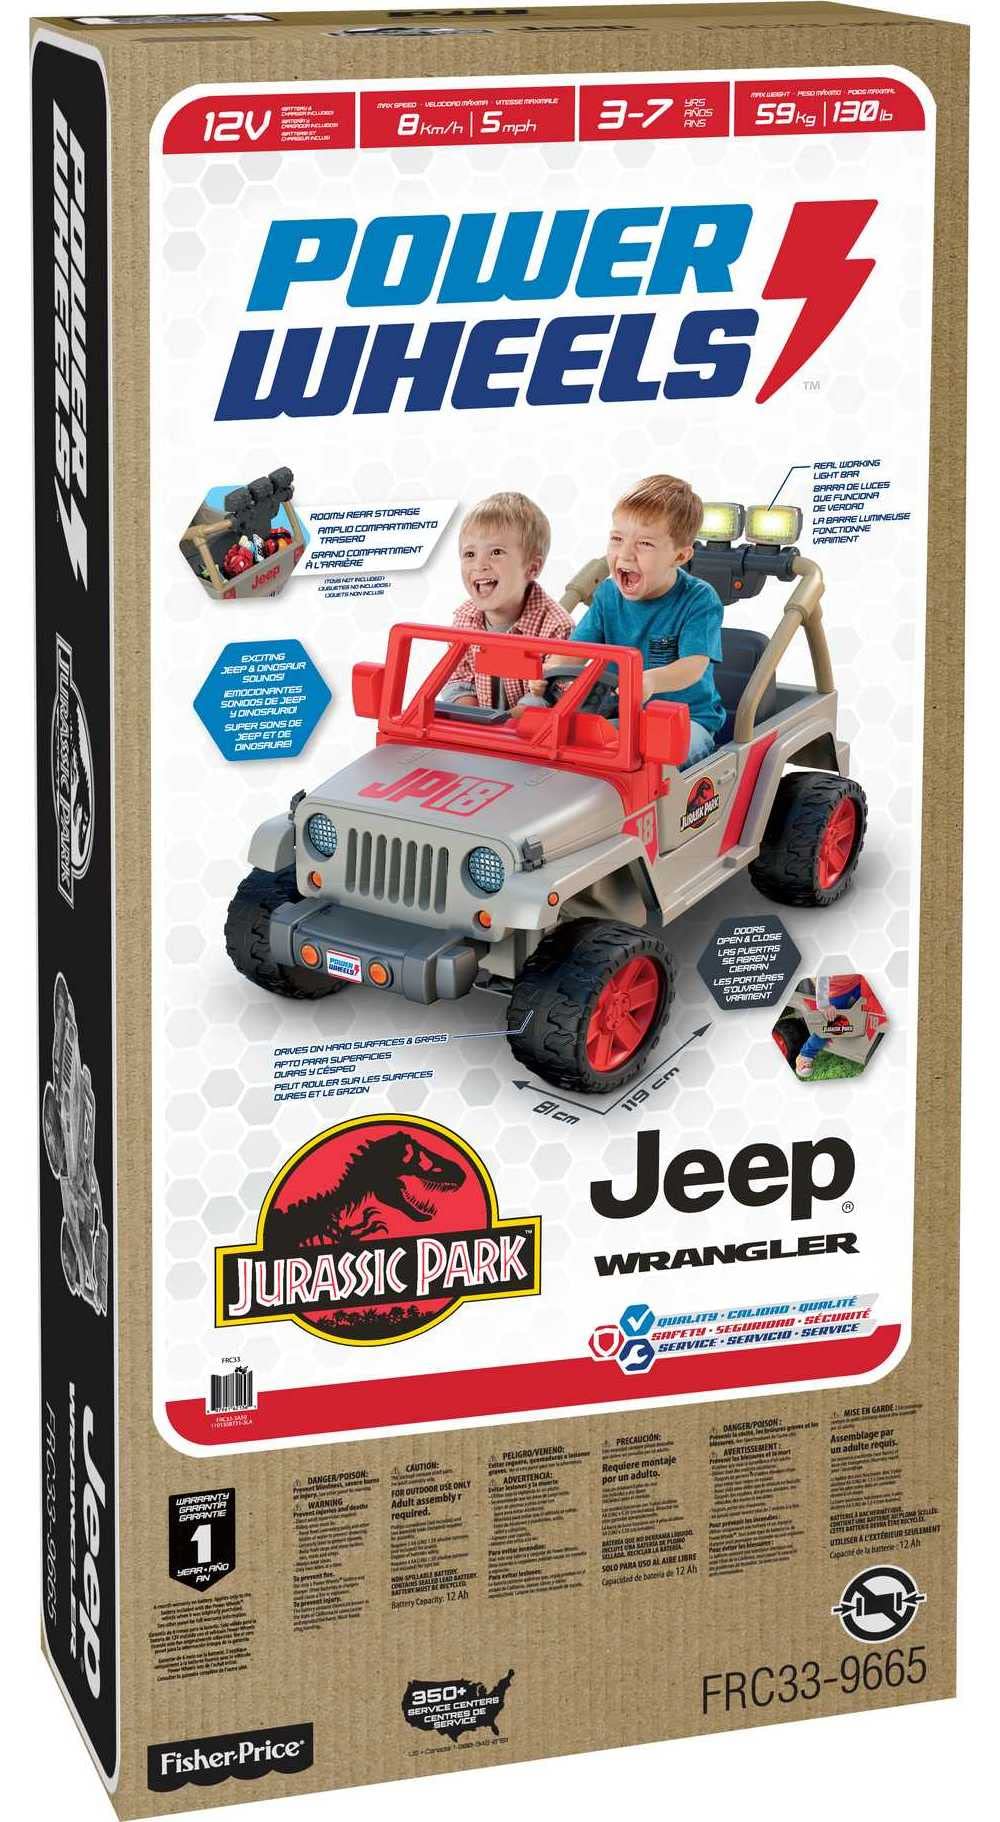 Fisher-Price Power Wheels Jurassic Park Jeep Wrangler Ride-On Vehicle –  Square Imports